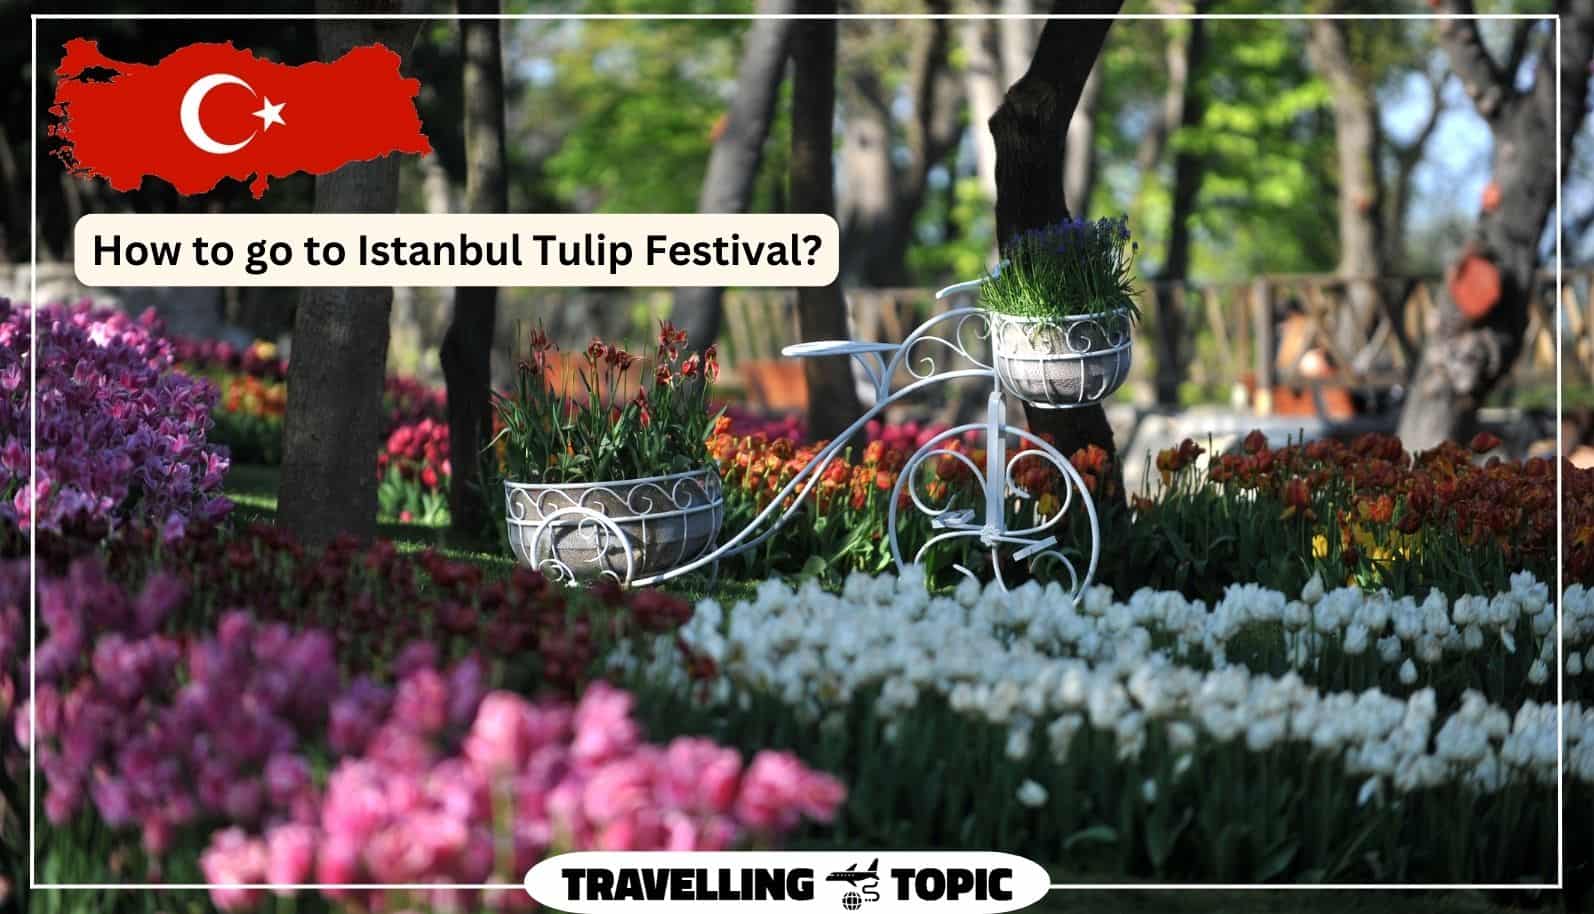 How to go to Istanbul Tulip Festival